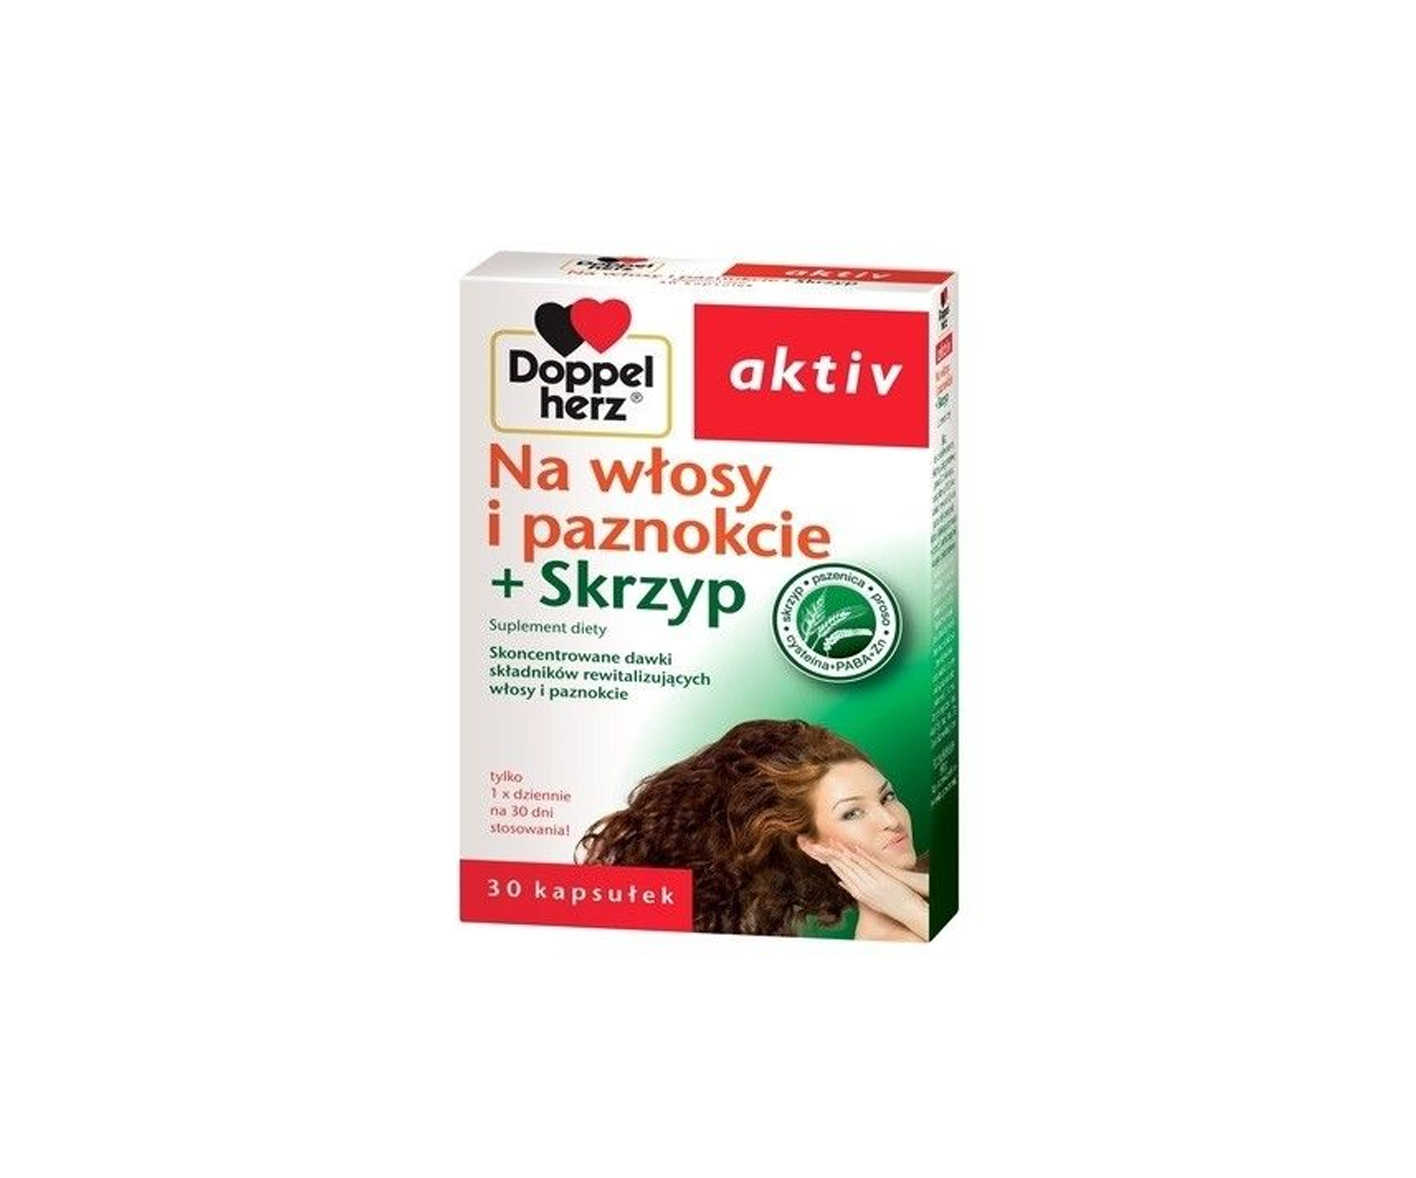 Doppelherz aktiv, For hair and nails + Horsetail, Tablets for hair and nails